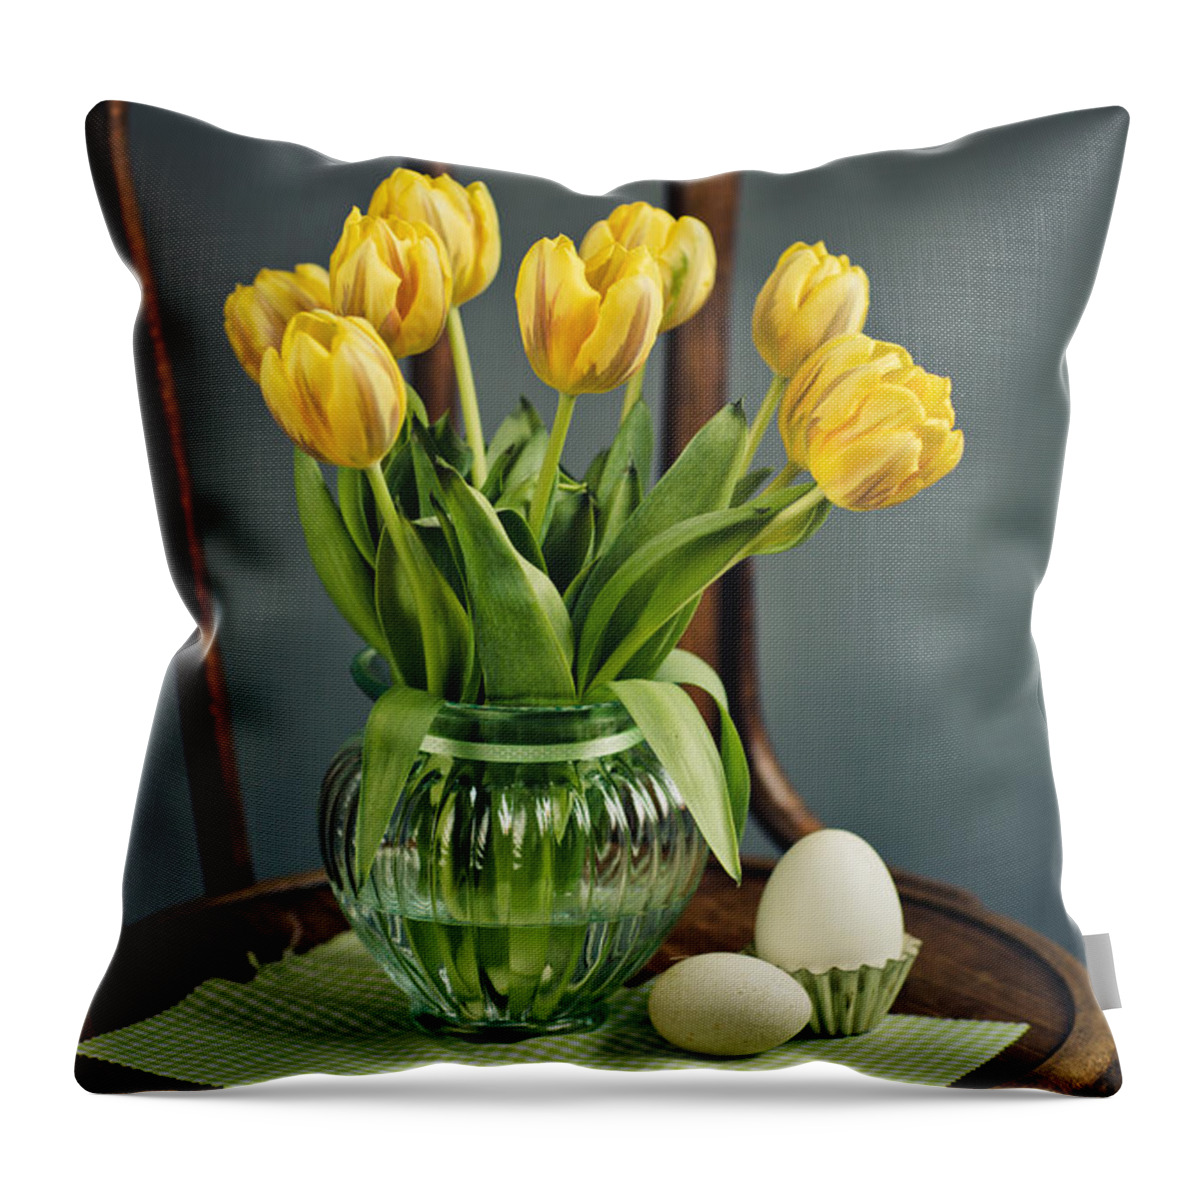 Tulip Throw Pillow featuring the photograph Still Life with Yellow Tulips by Nailia Schwarz